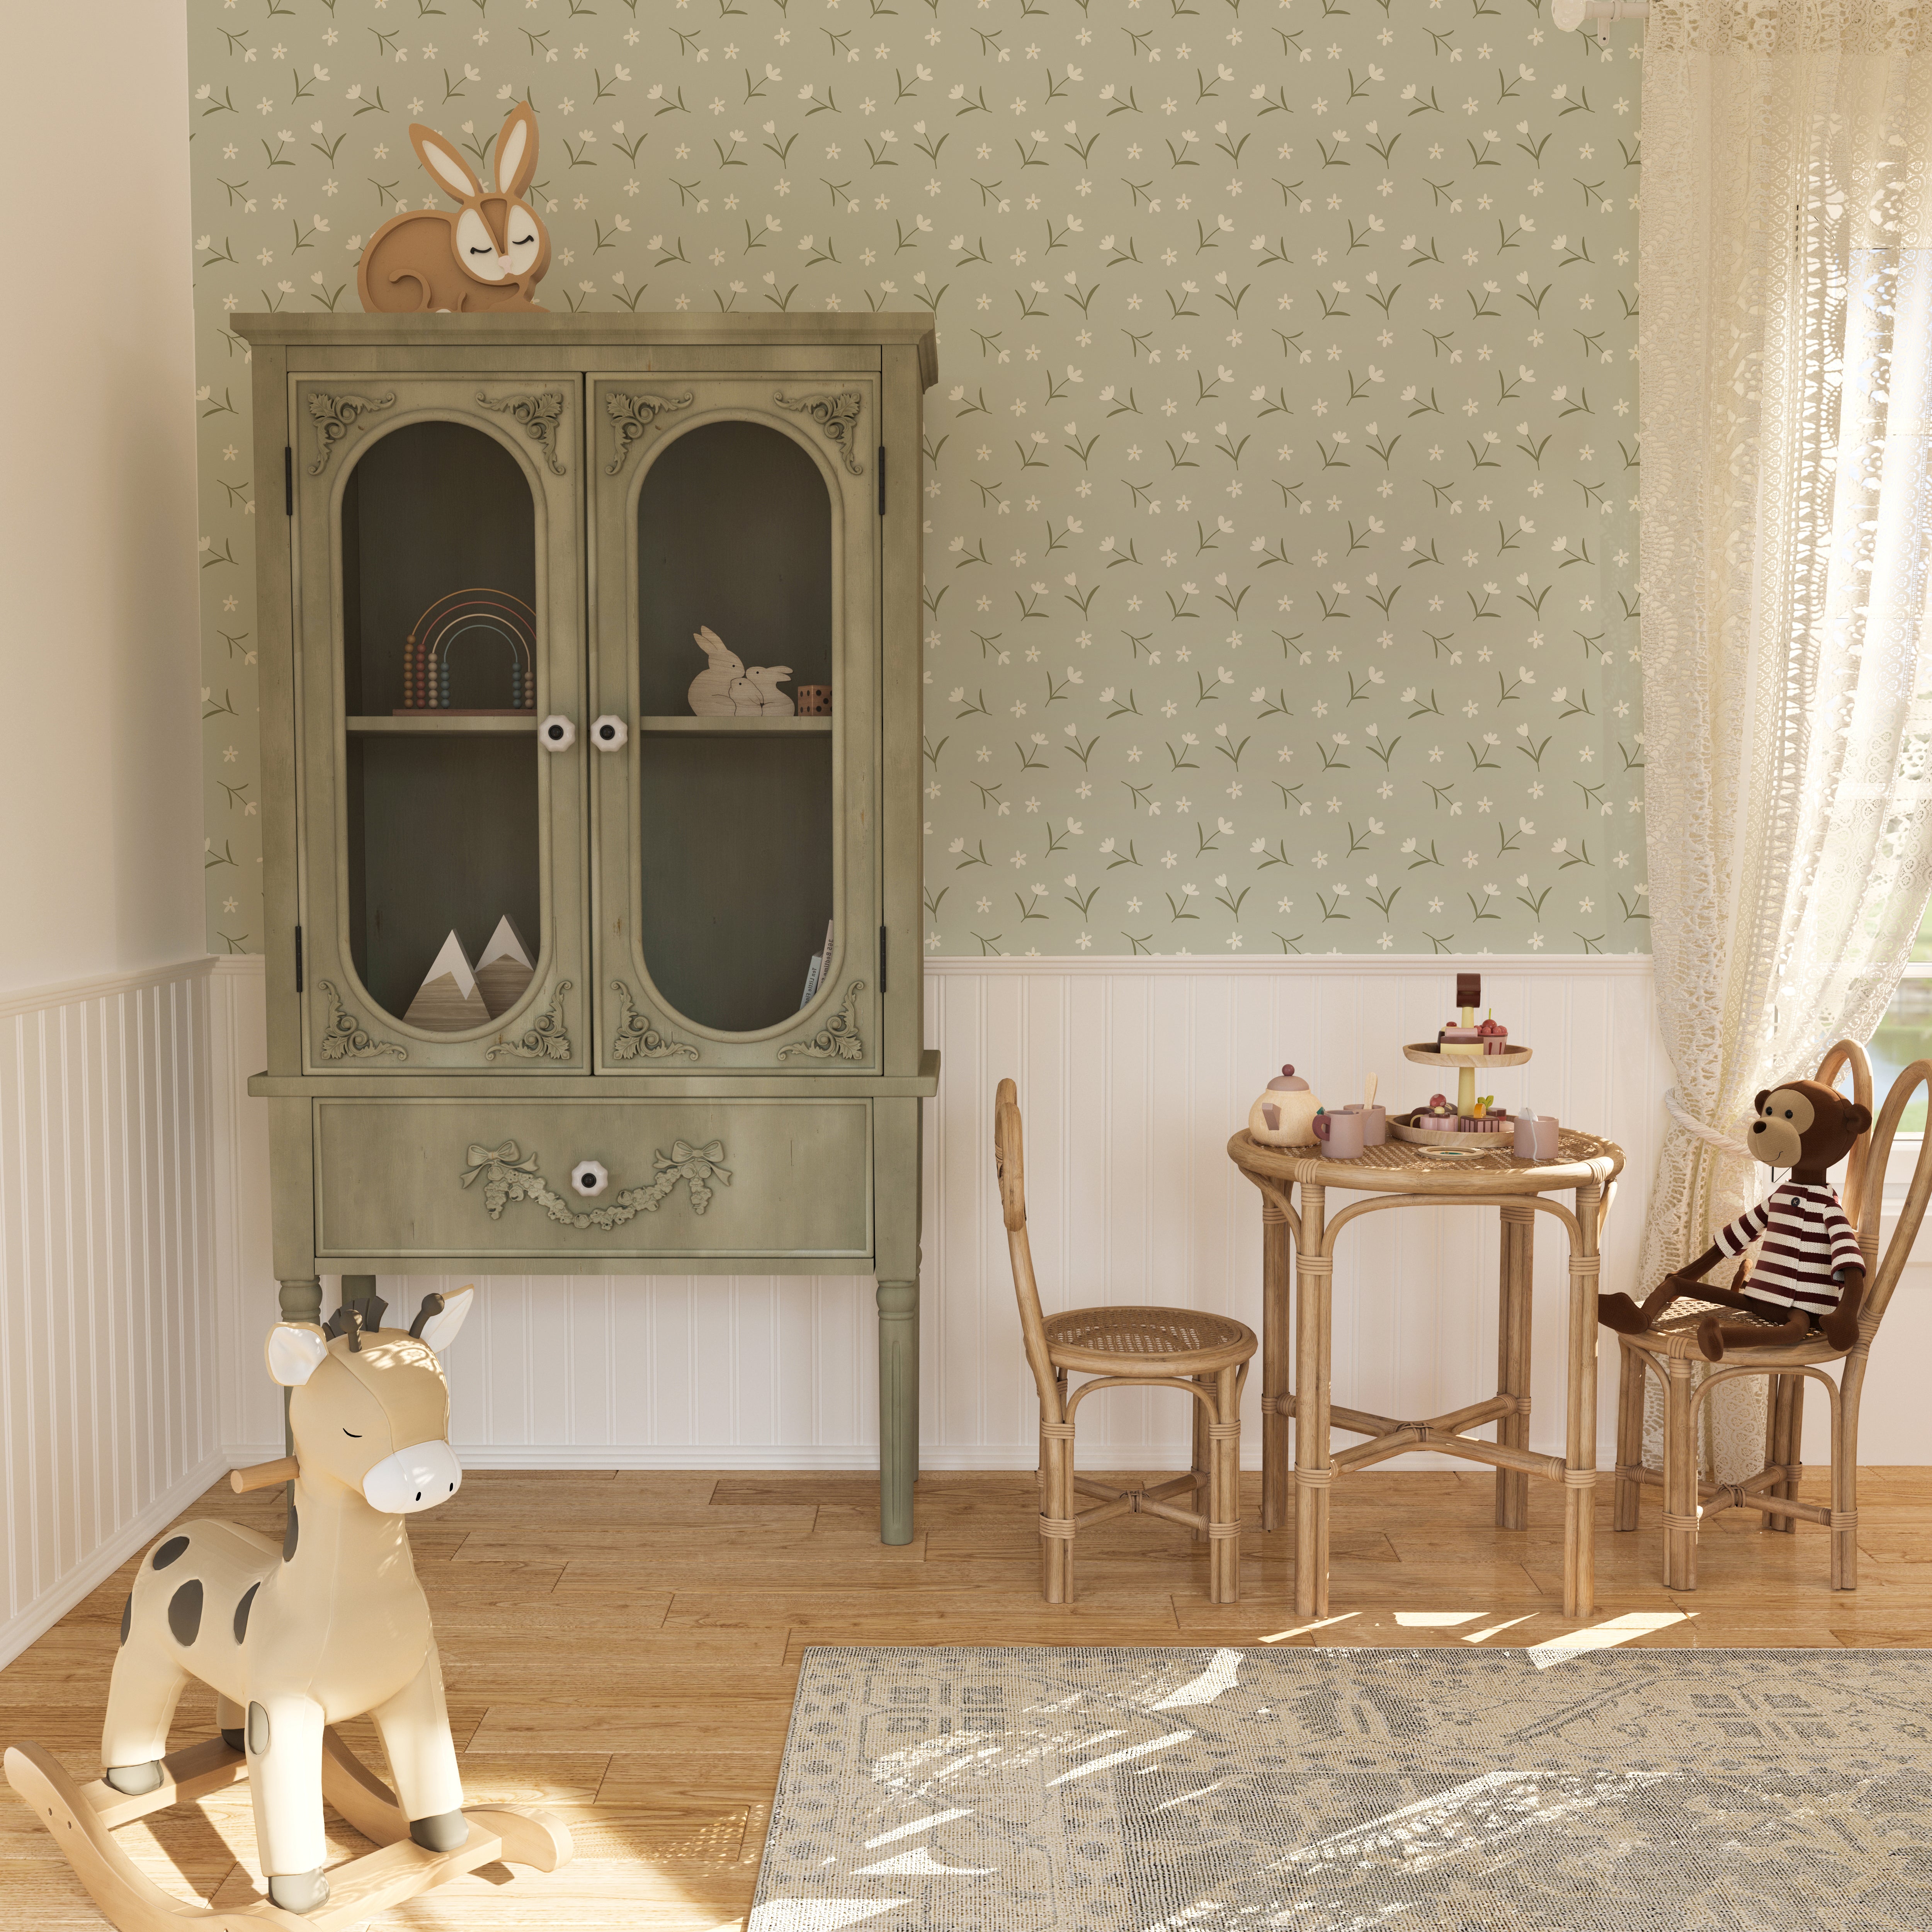 Interior view of a charming children's room with Soft Meadow Wallpaper - 12.5" on the feature wall. The wallpaper features a delicate pattern of small white flowers and green leaves on a soft sage background, creating a whimsical and inviting atmosphere.